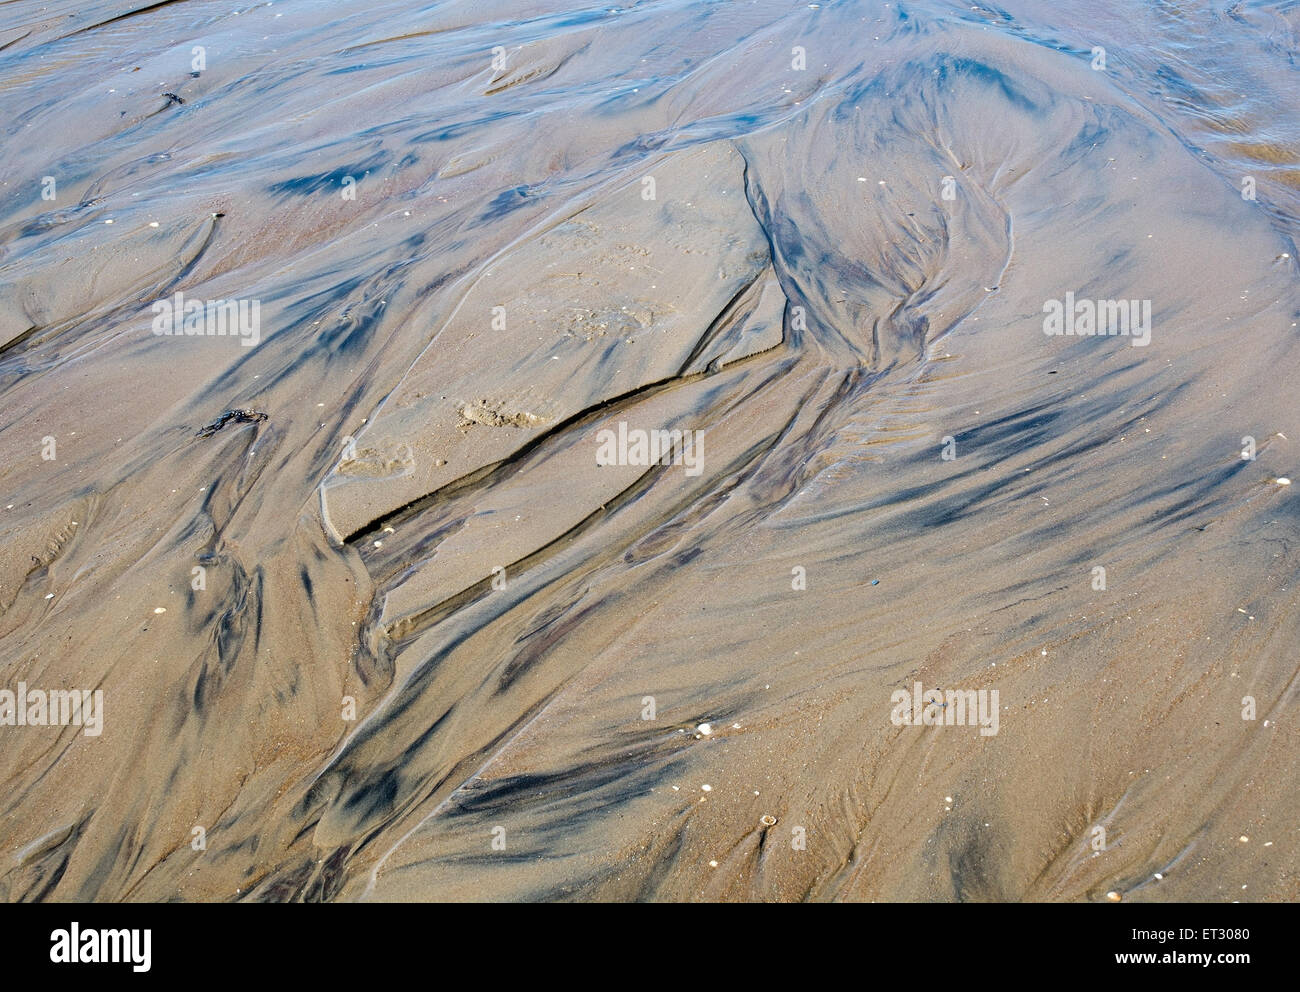 Abstract sand sediment pattern, seaside natural organic landscape detail. Stock Photo